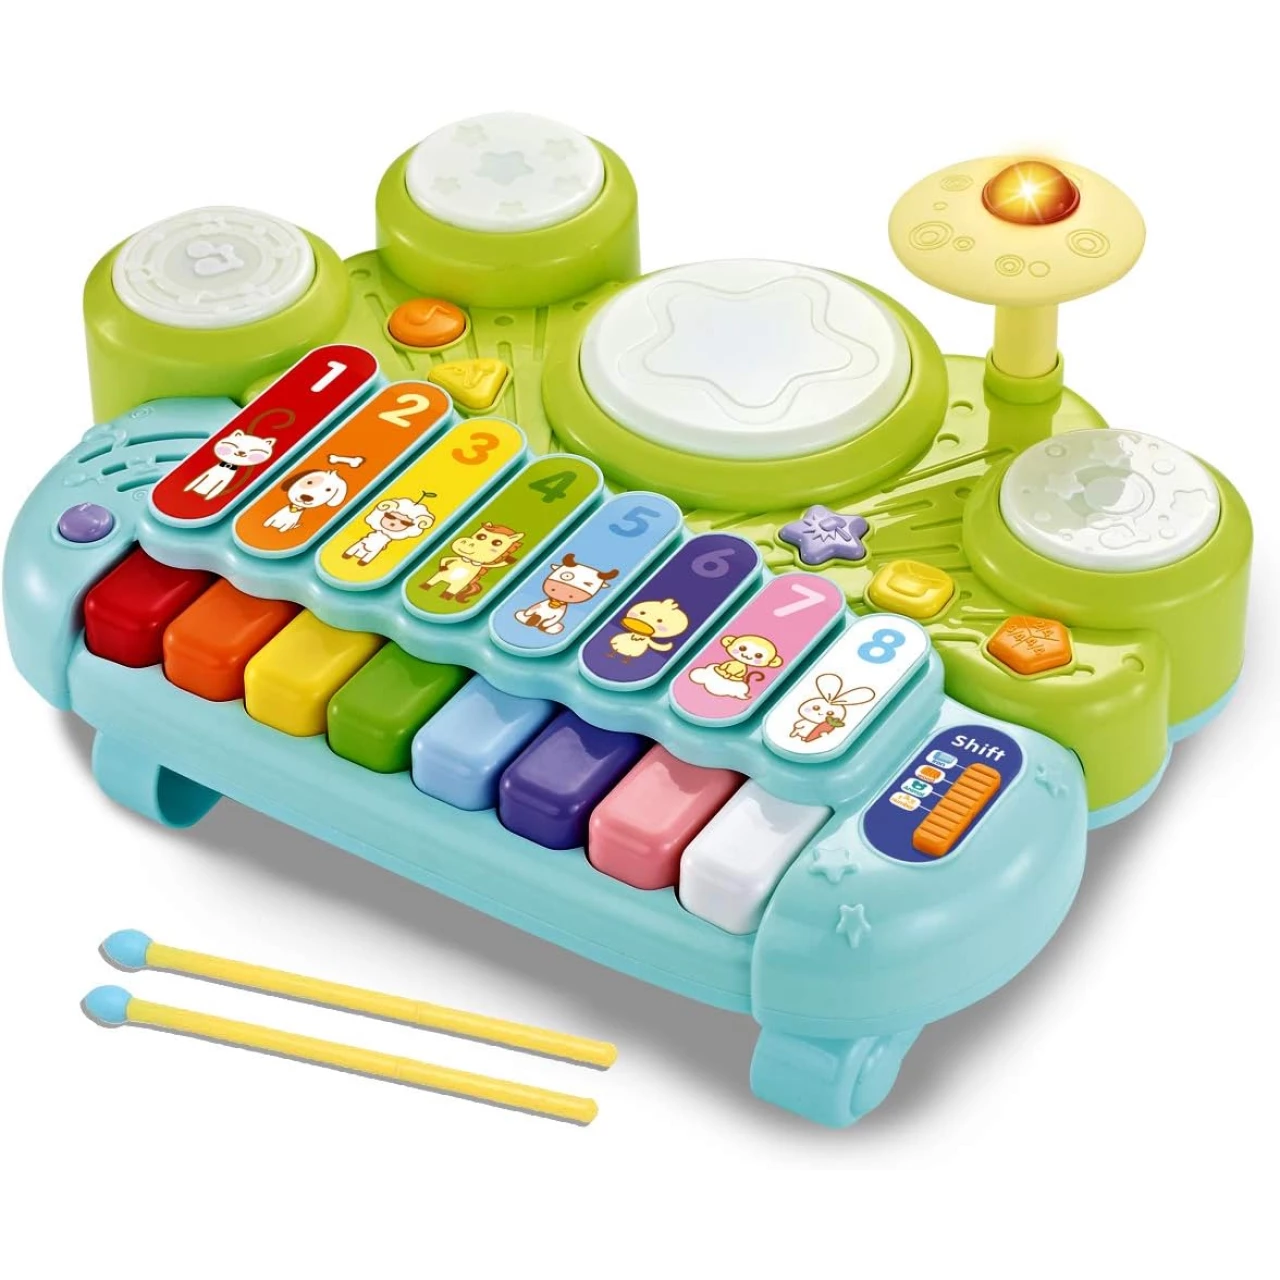 fisca 3 in 1 Musical Instruments Toys, Electronic Piano Keyboard Xylophone Drum Set - Learning Toys with Lights